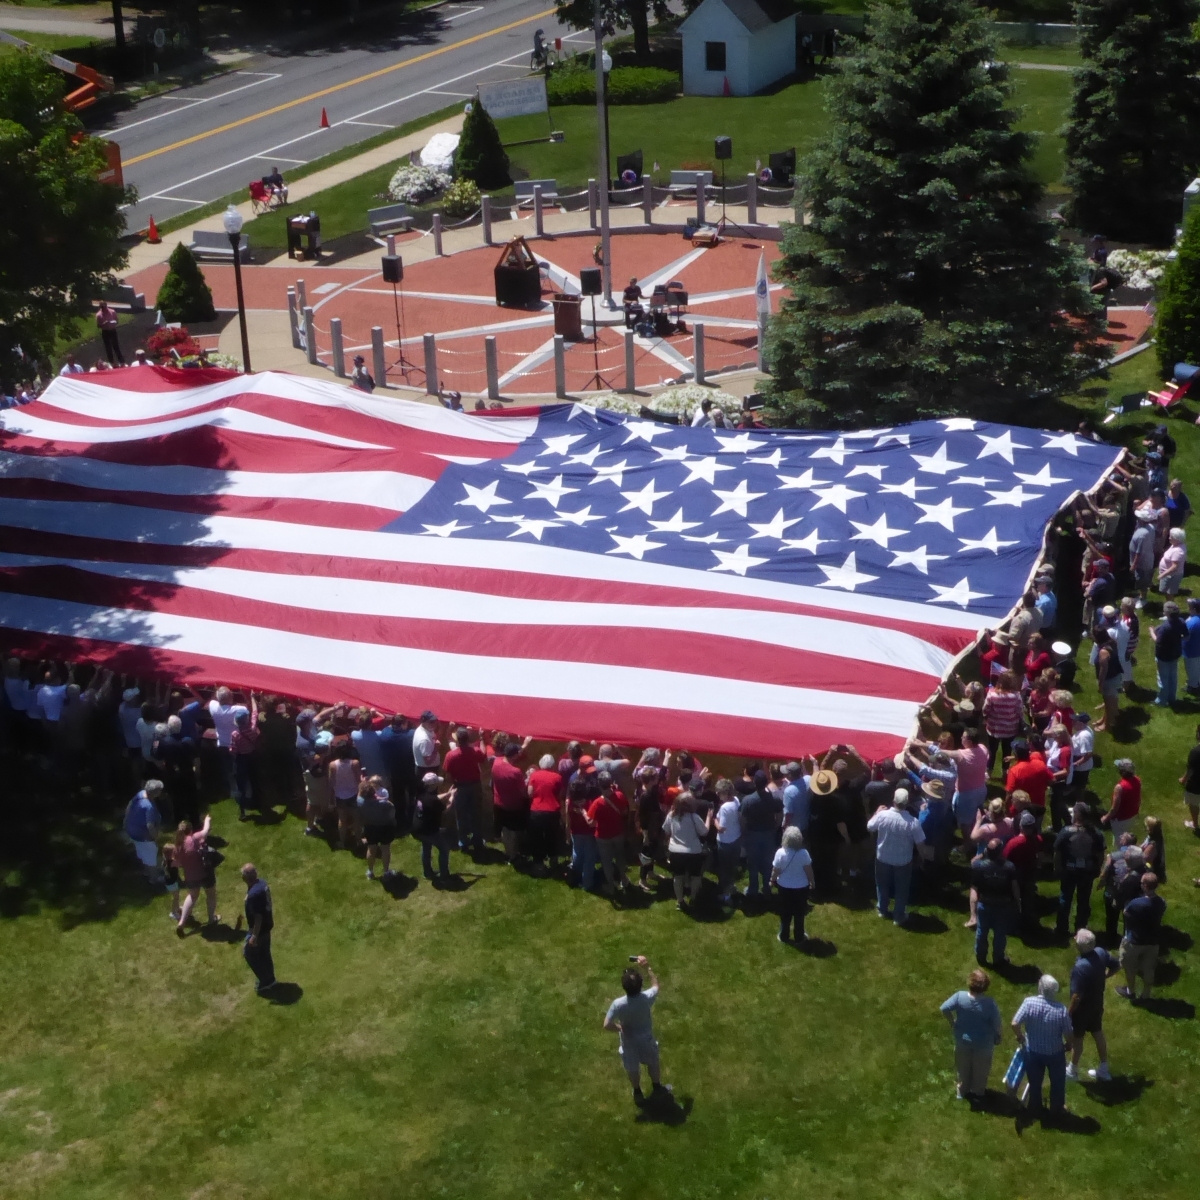 World War 2 and Mt Rushmore Flags visit Middleborough